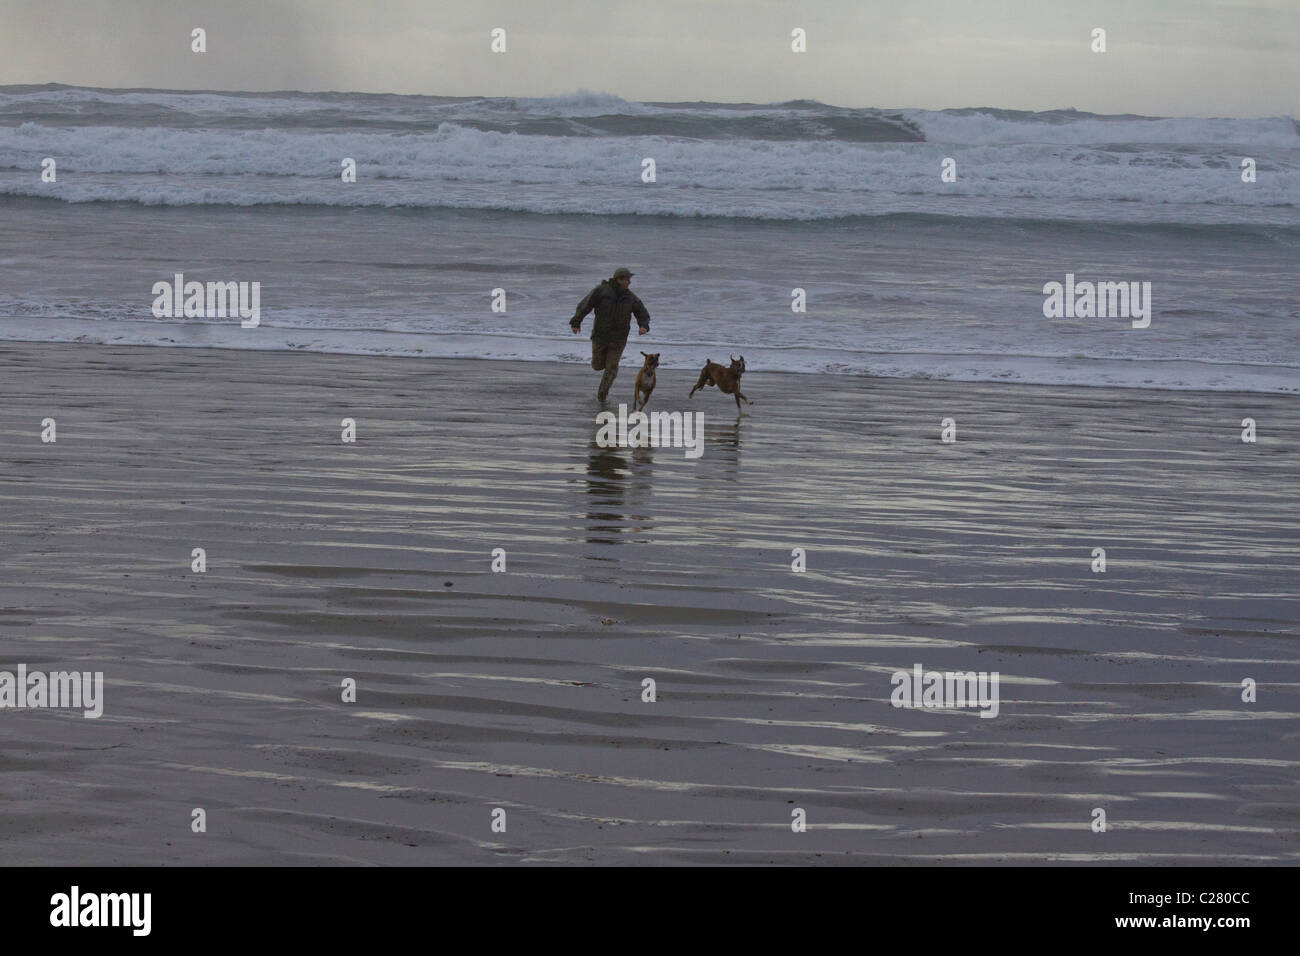 Man and two dogs play in the surf, Pacific Rim National Park, Vancouver Island, British Columbia Stock Photo